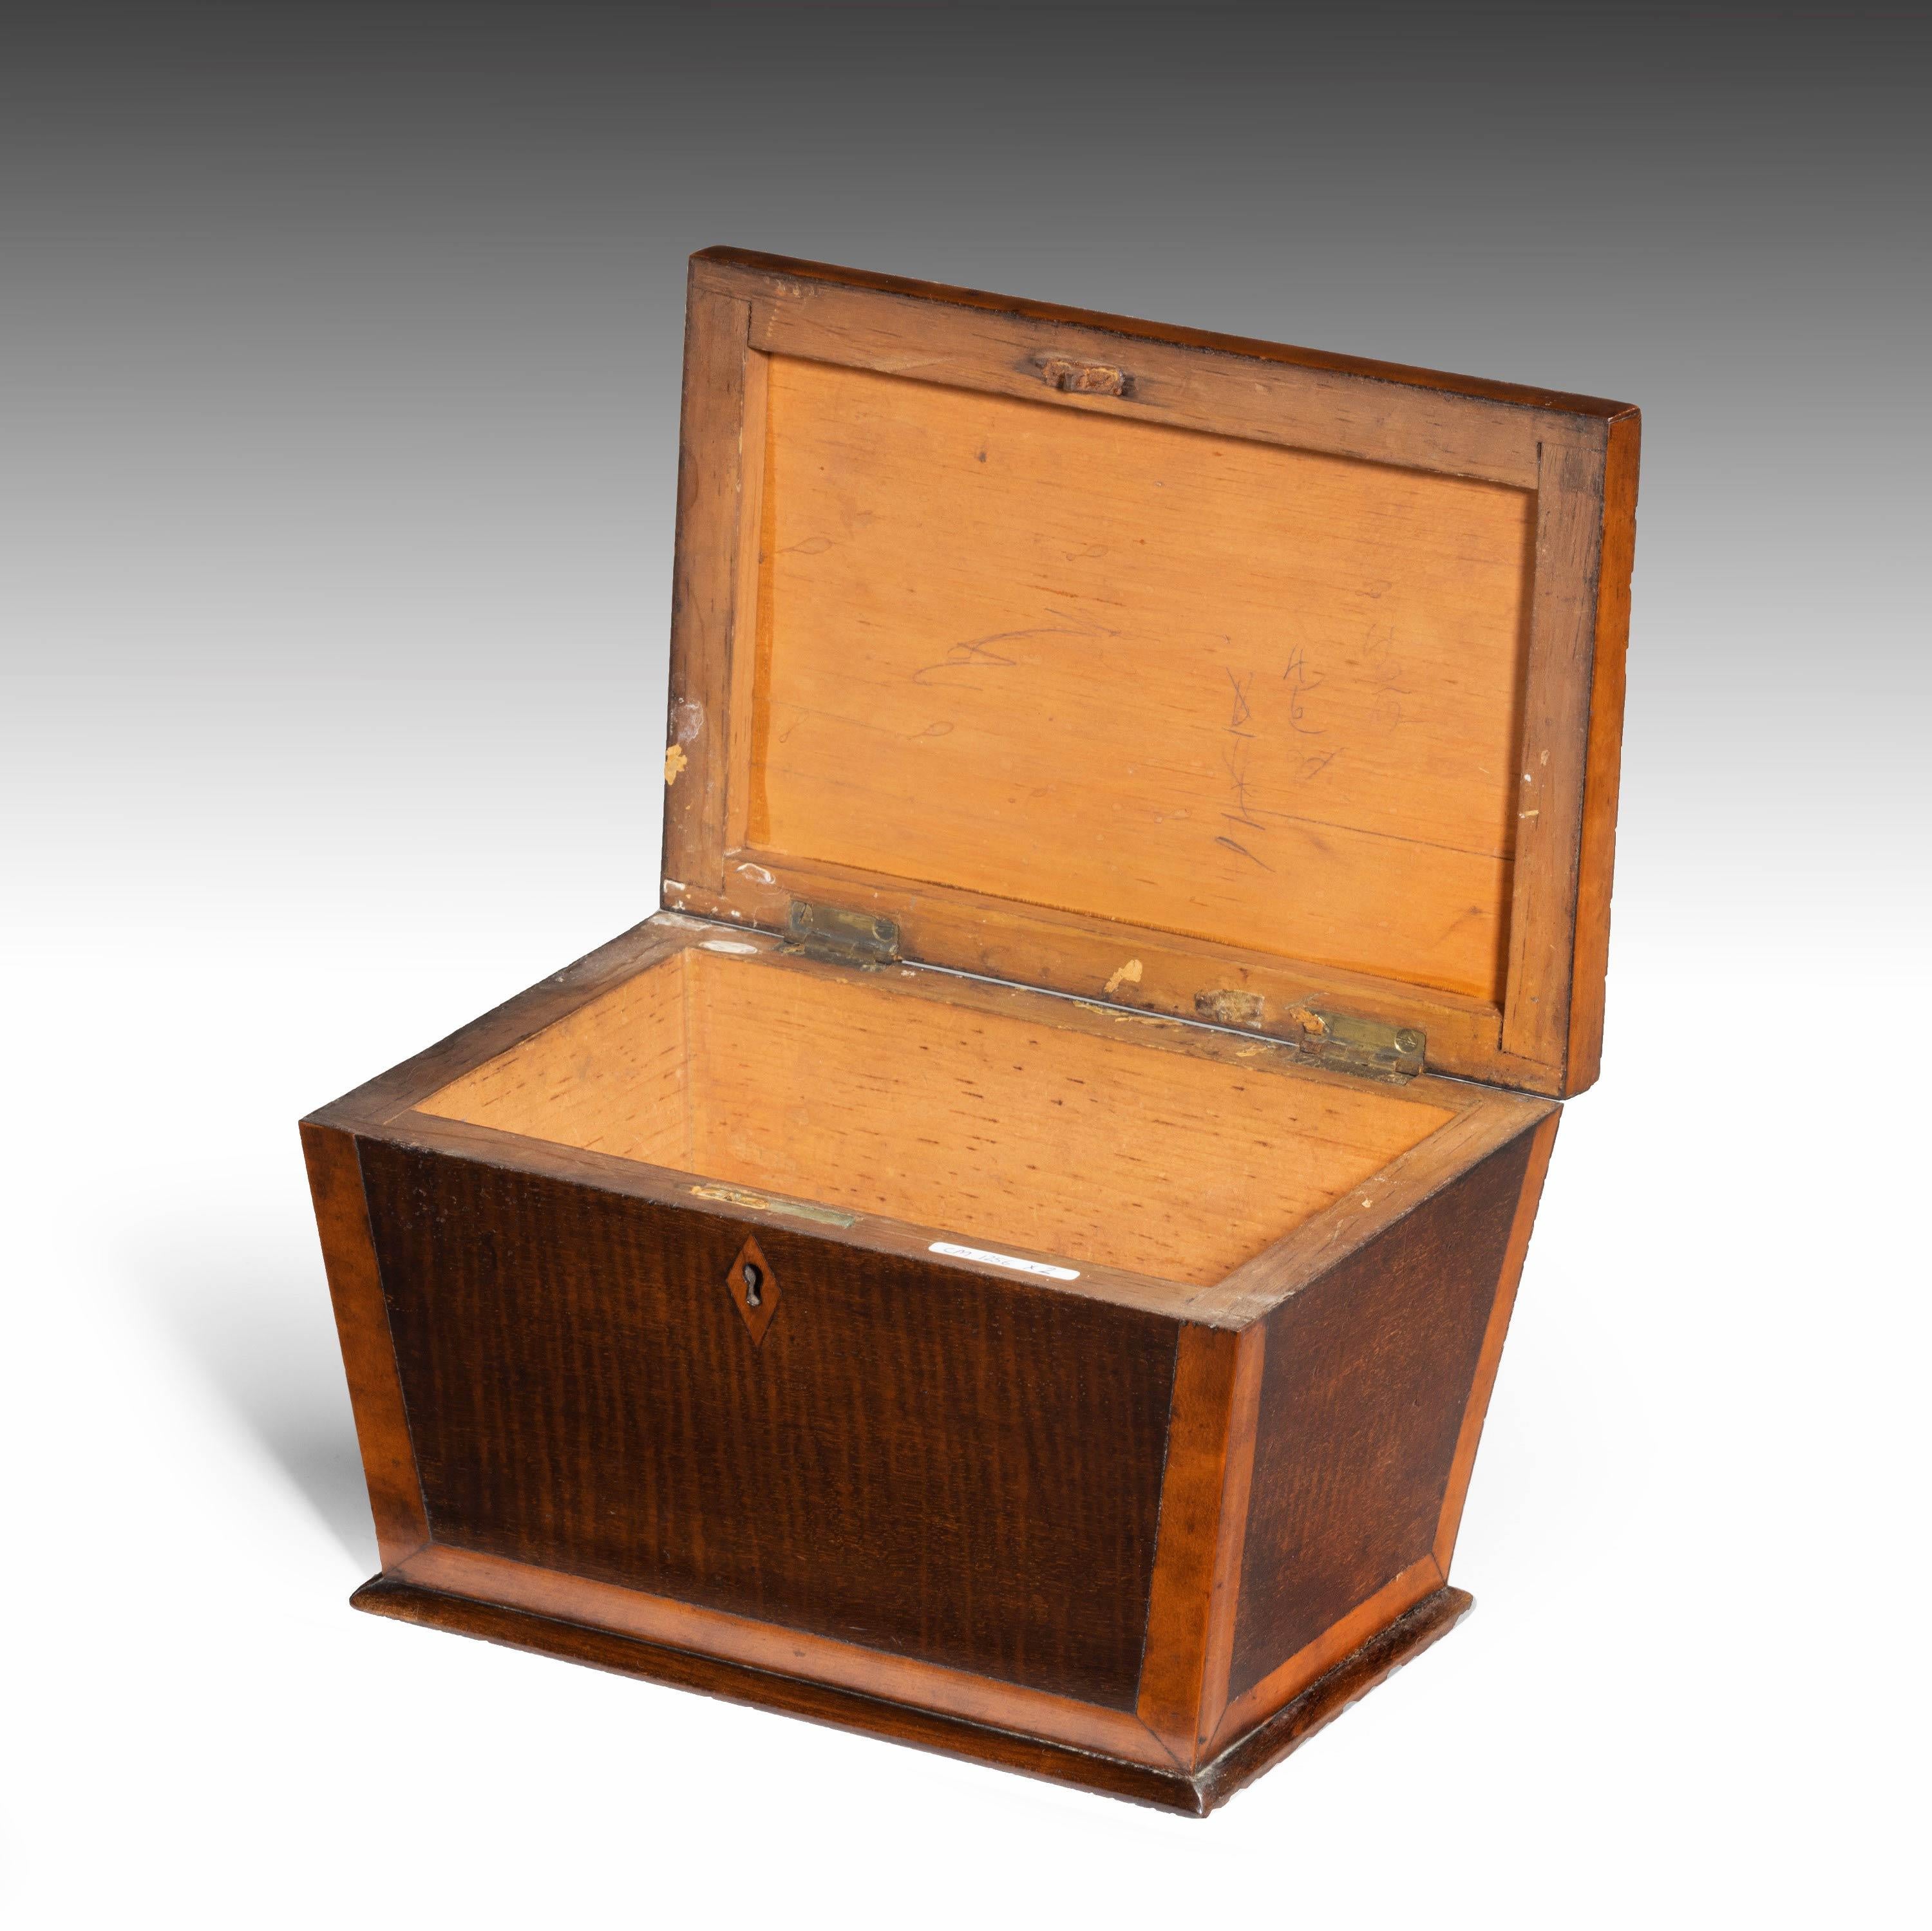 A shaped, late George III period mahogany tea caddy. The edges banded in contrasting timber. The interior now without fittings.